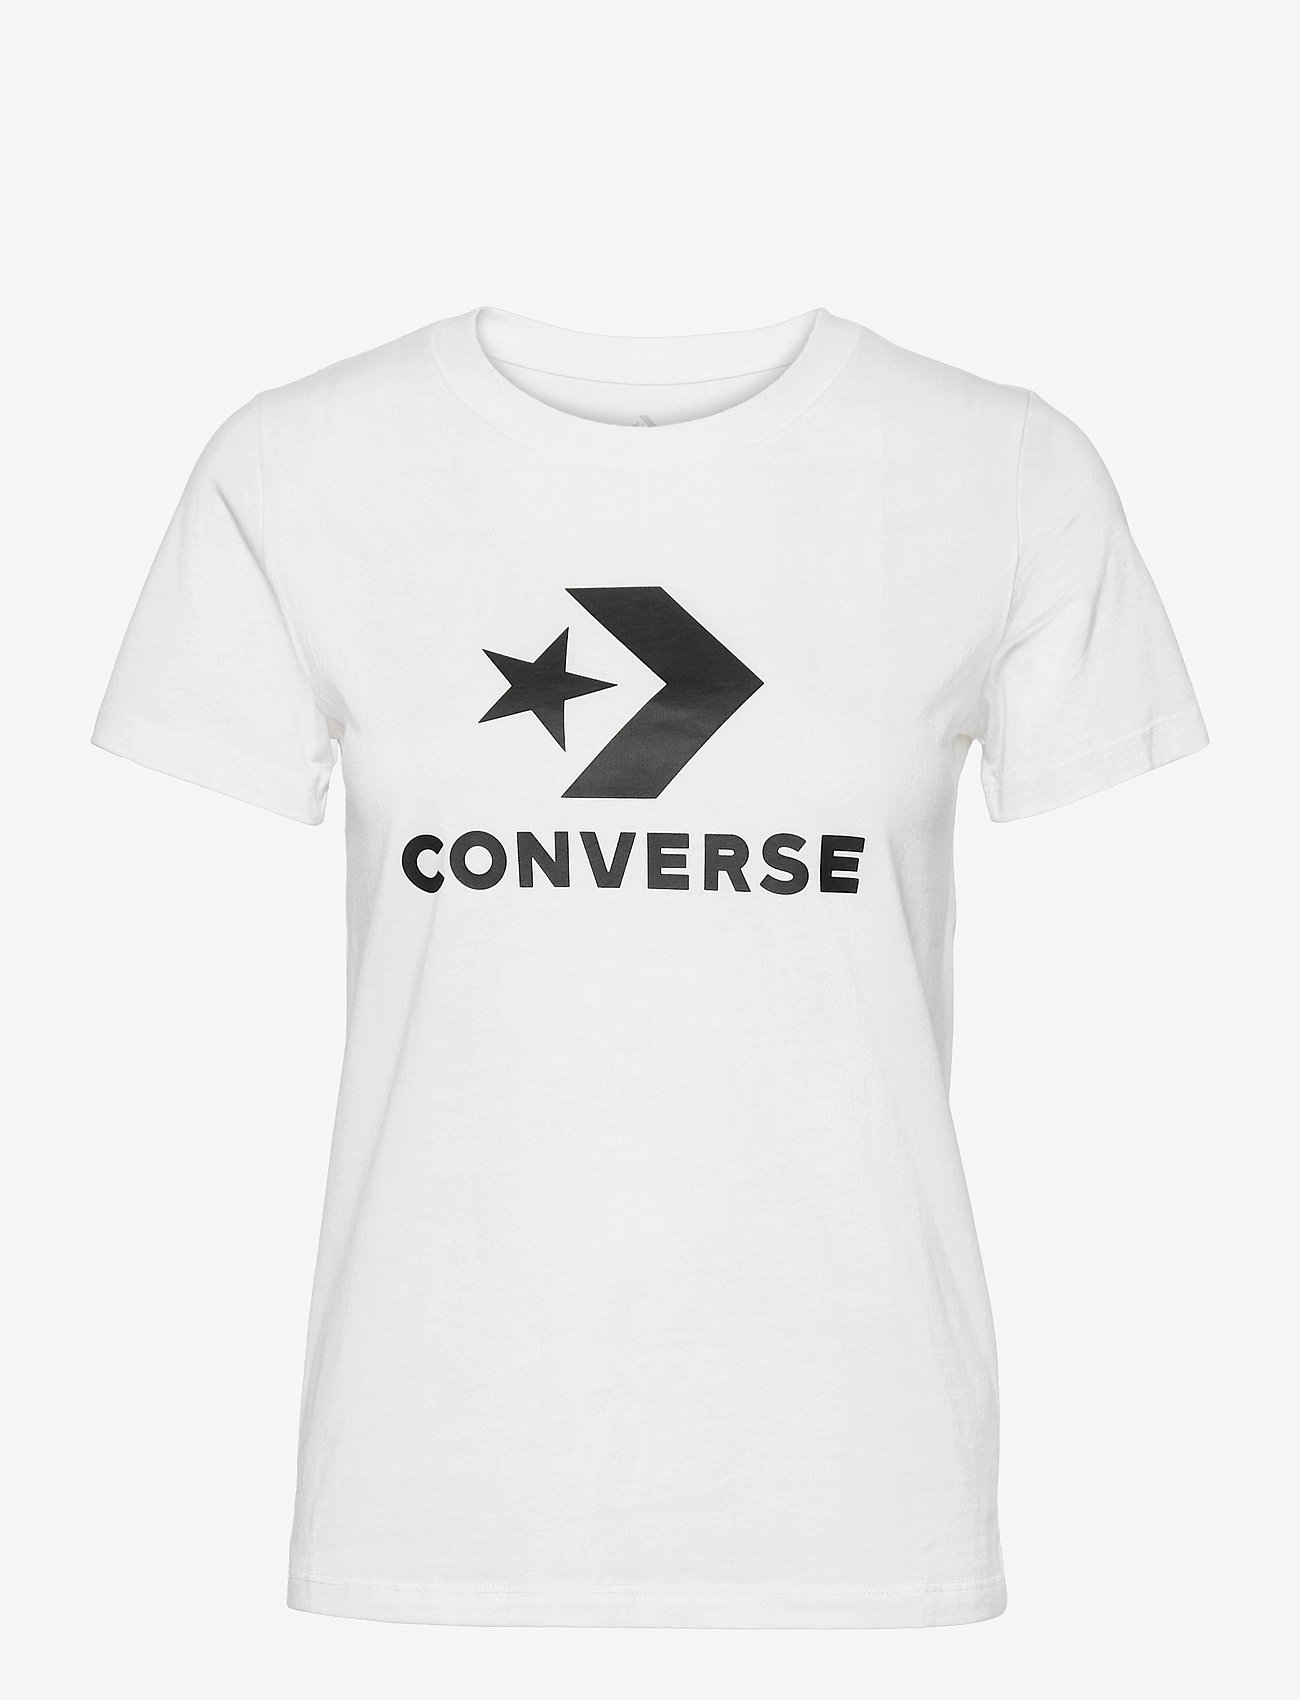 Converse Star Chevron Center Front Tee Pink - T-shirts & Tops ...